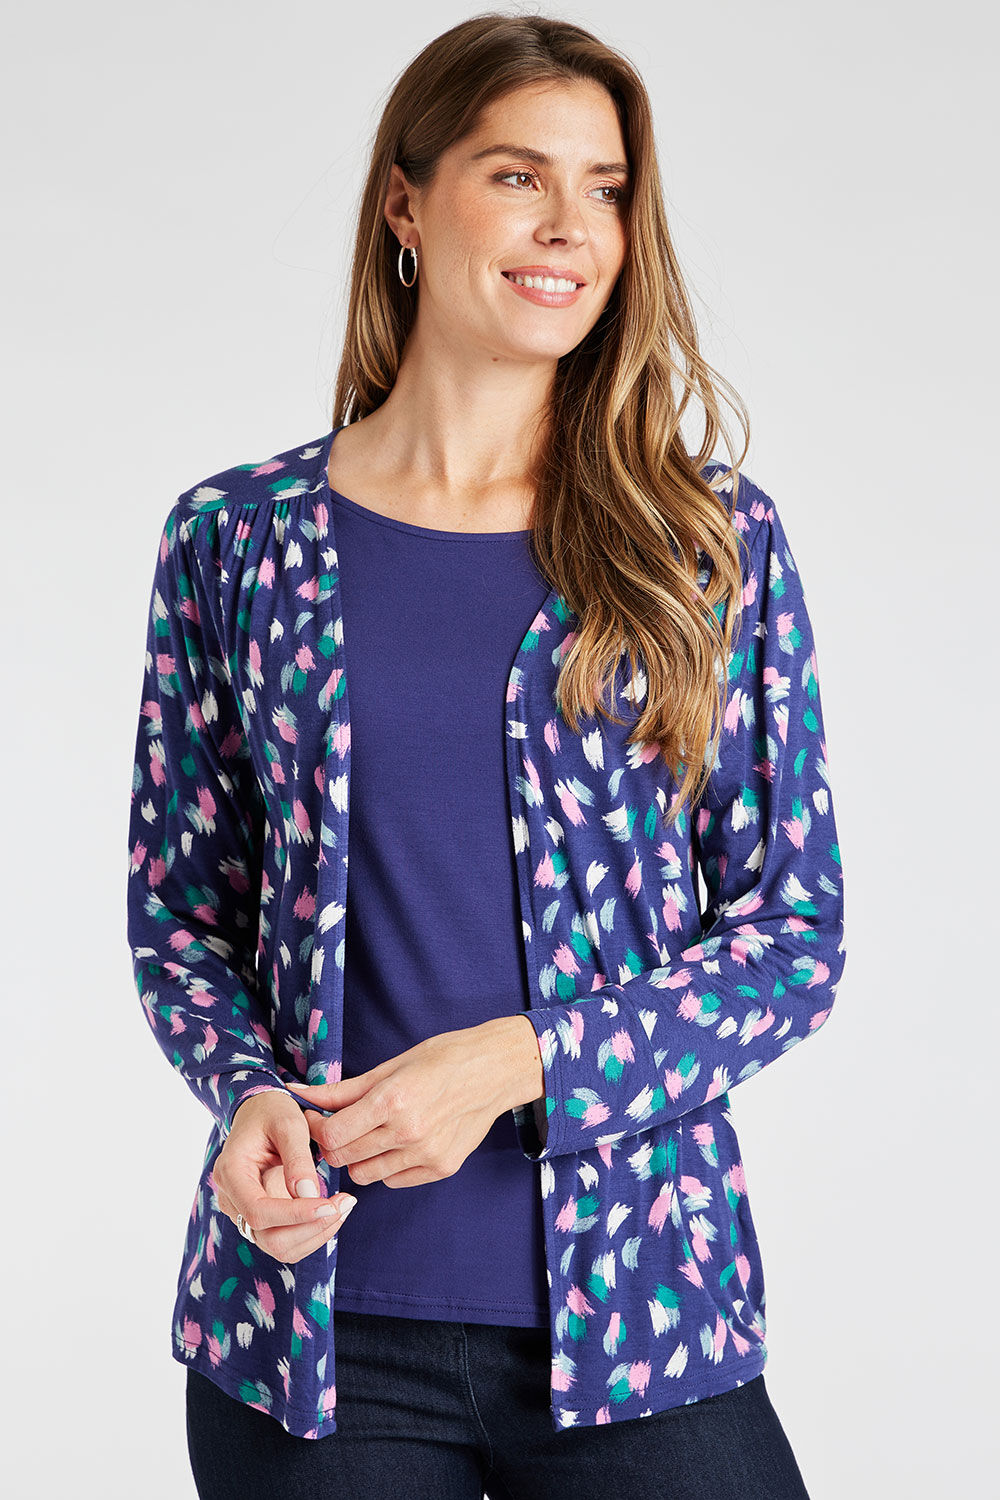 Dash Navy Long Sleeve 2 in 1 Print Cardigan and Plain Top, Size: 10